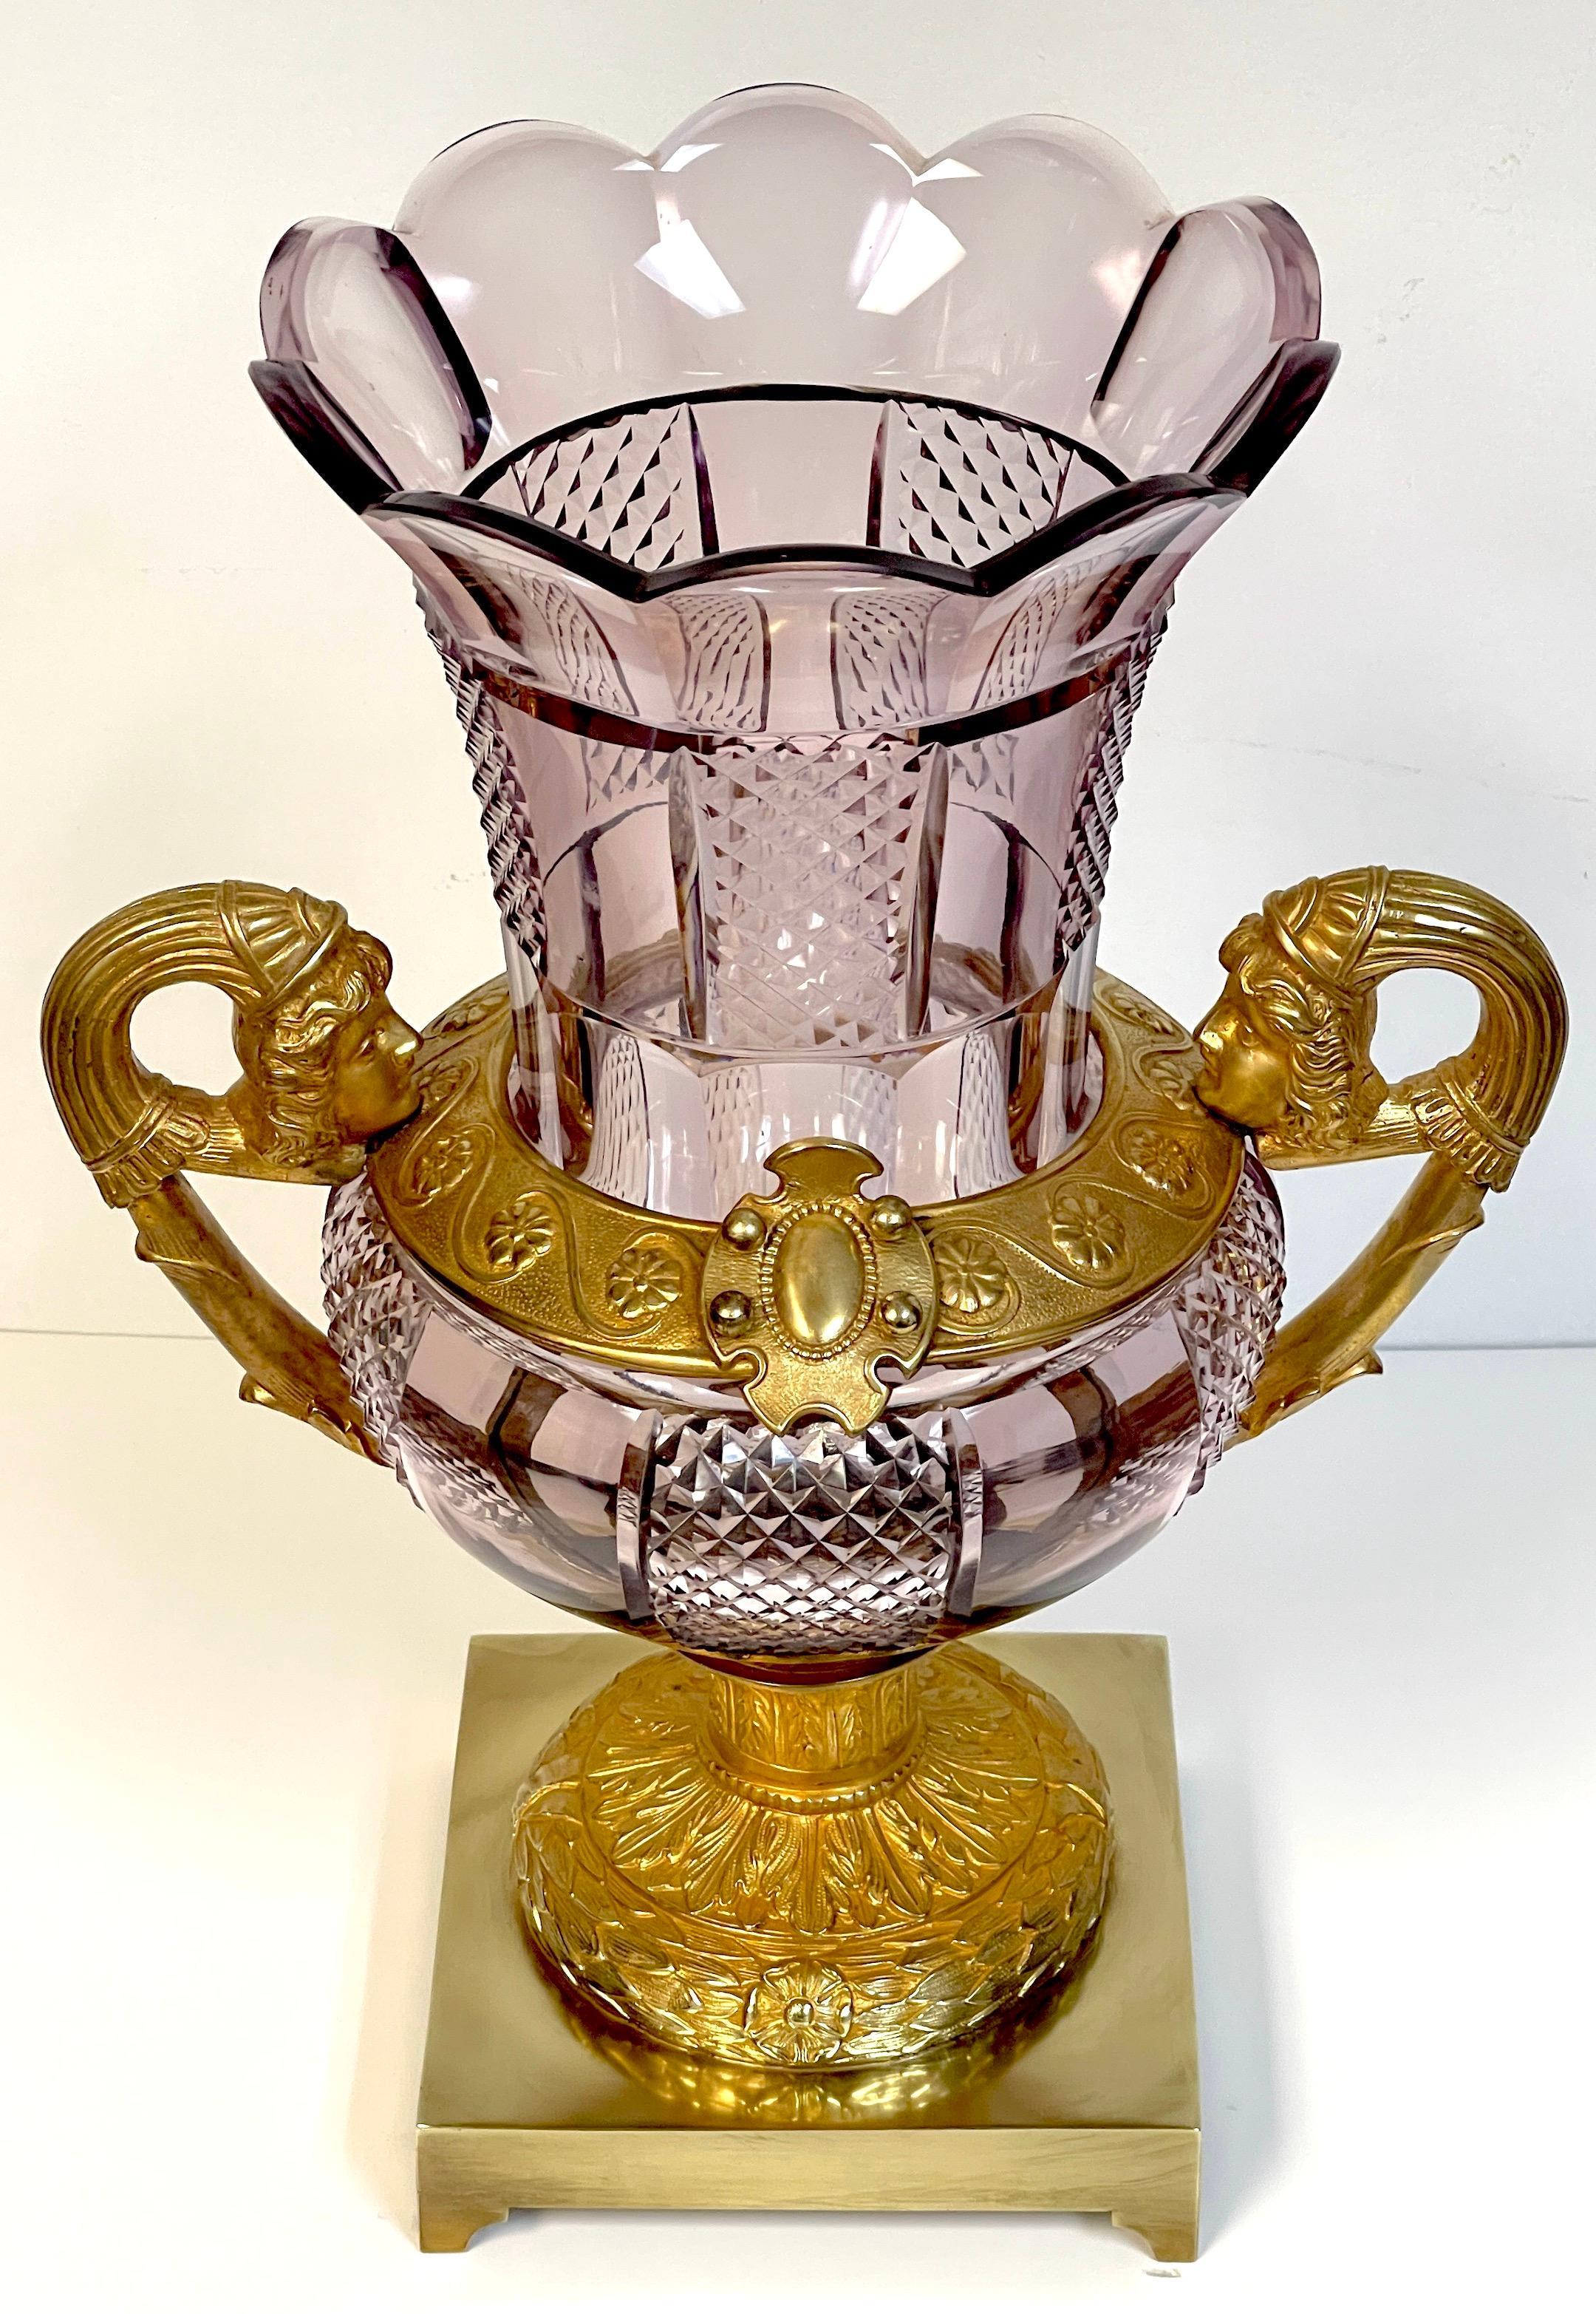 Large 19th-century Russian Neoclassical Ormolu and Amethyst Cut Glass Vase
St. Petersburg, mid-19th century 

Offering a magnificent glimpse into 19th-century Russian Neoclassicism, this large and imposing vase hails from St. Petersburg, embodying